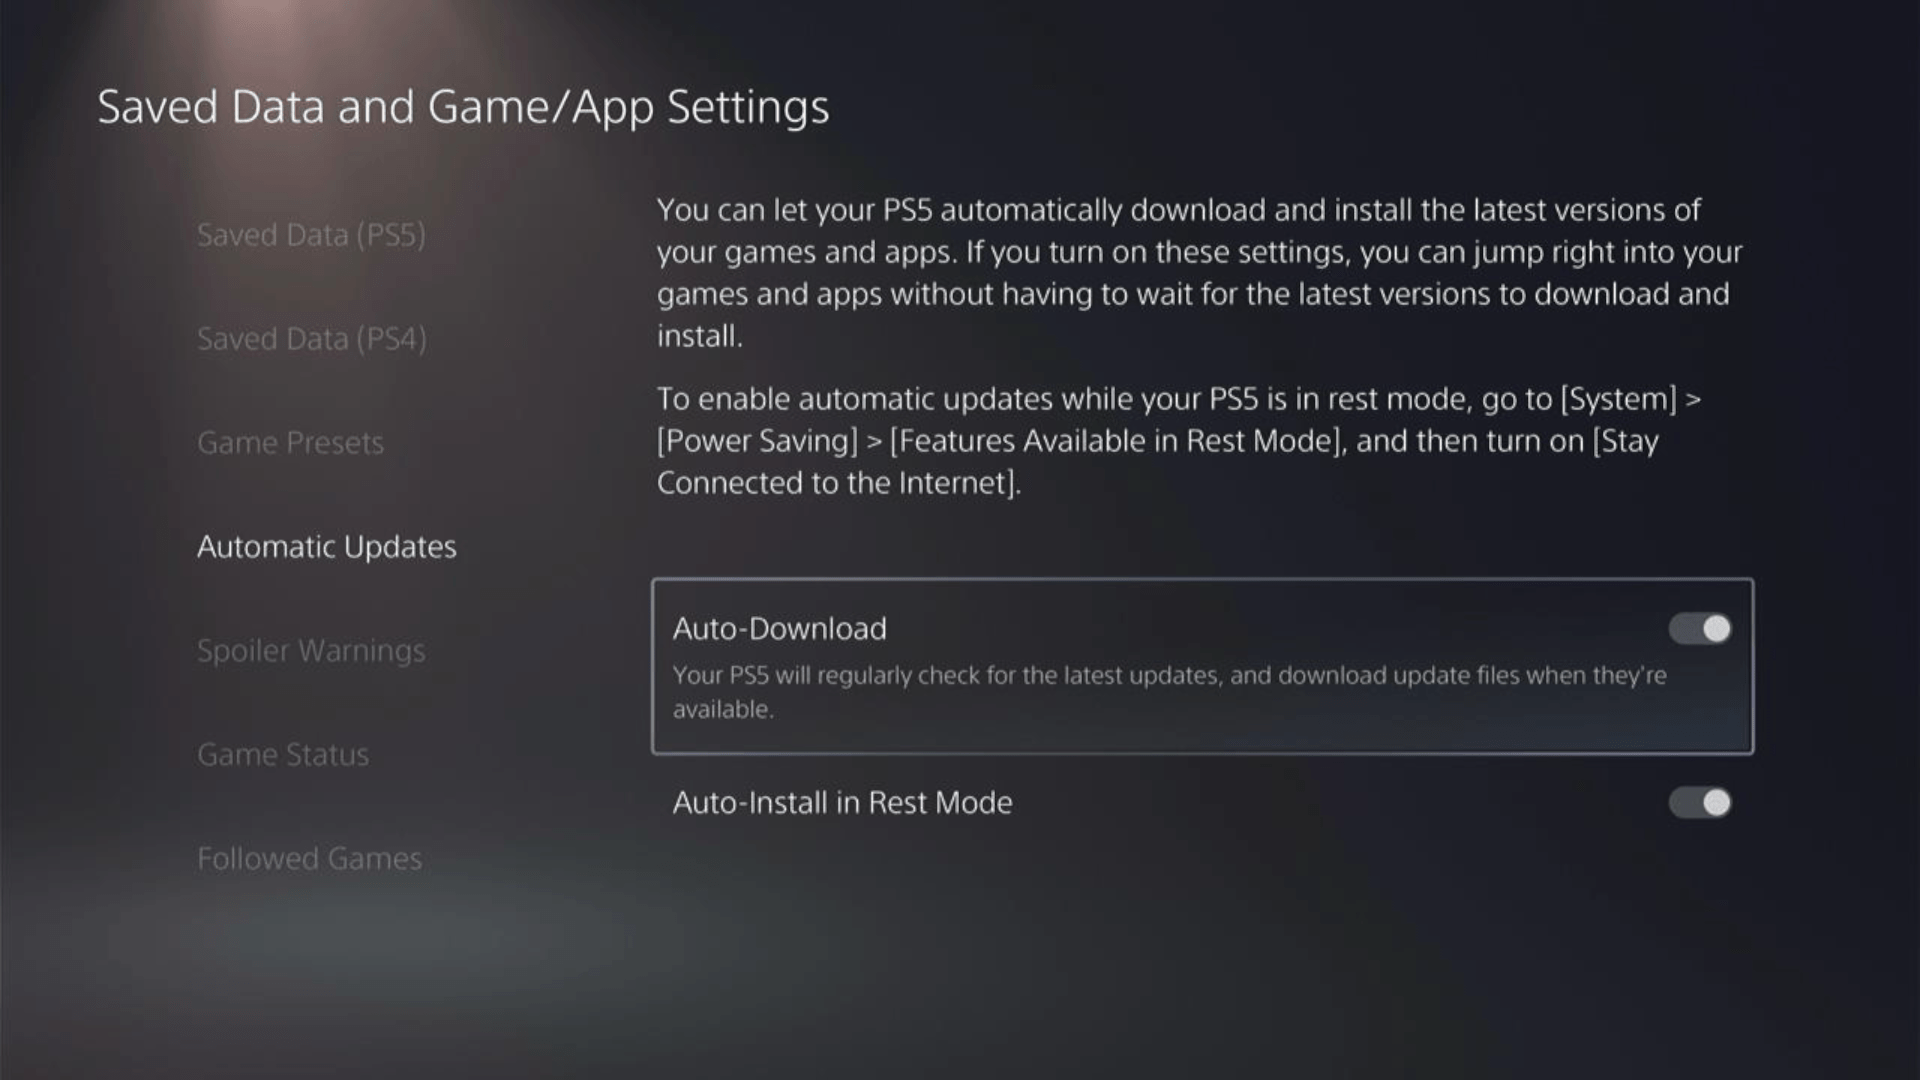 In the Saved Data and Game/App Settings window, select Automatic Updates from the left sidebar to enable automatic game updates to avoid CE-100096-6